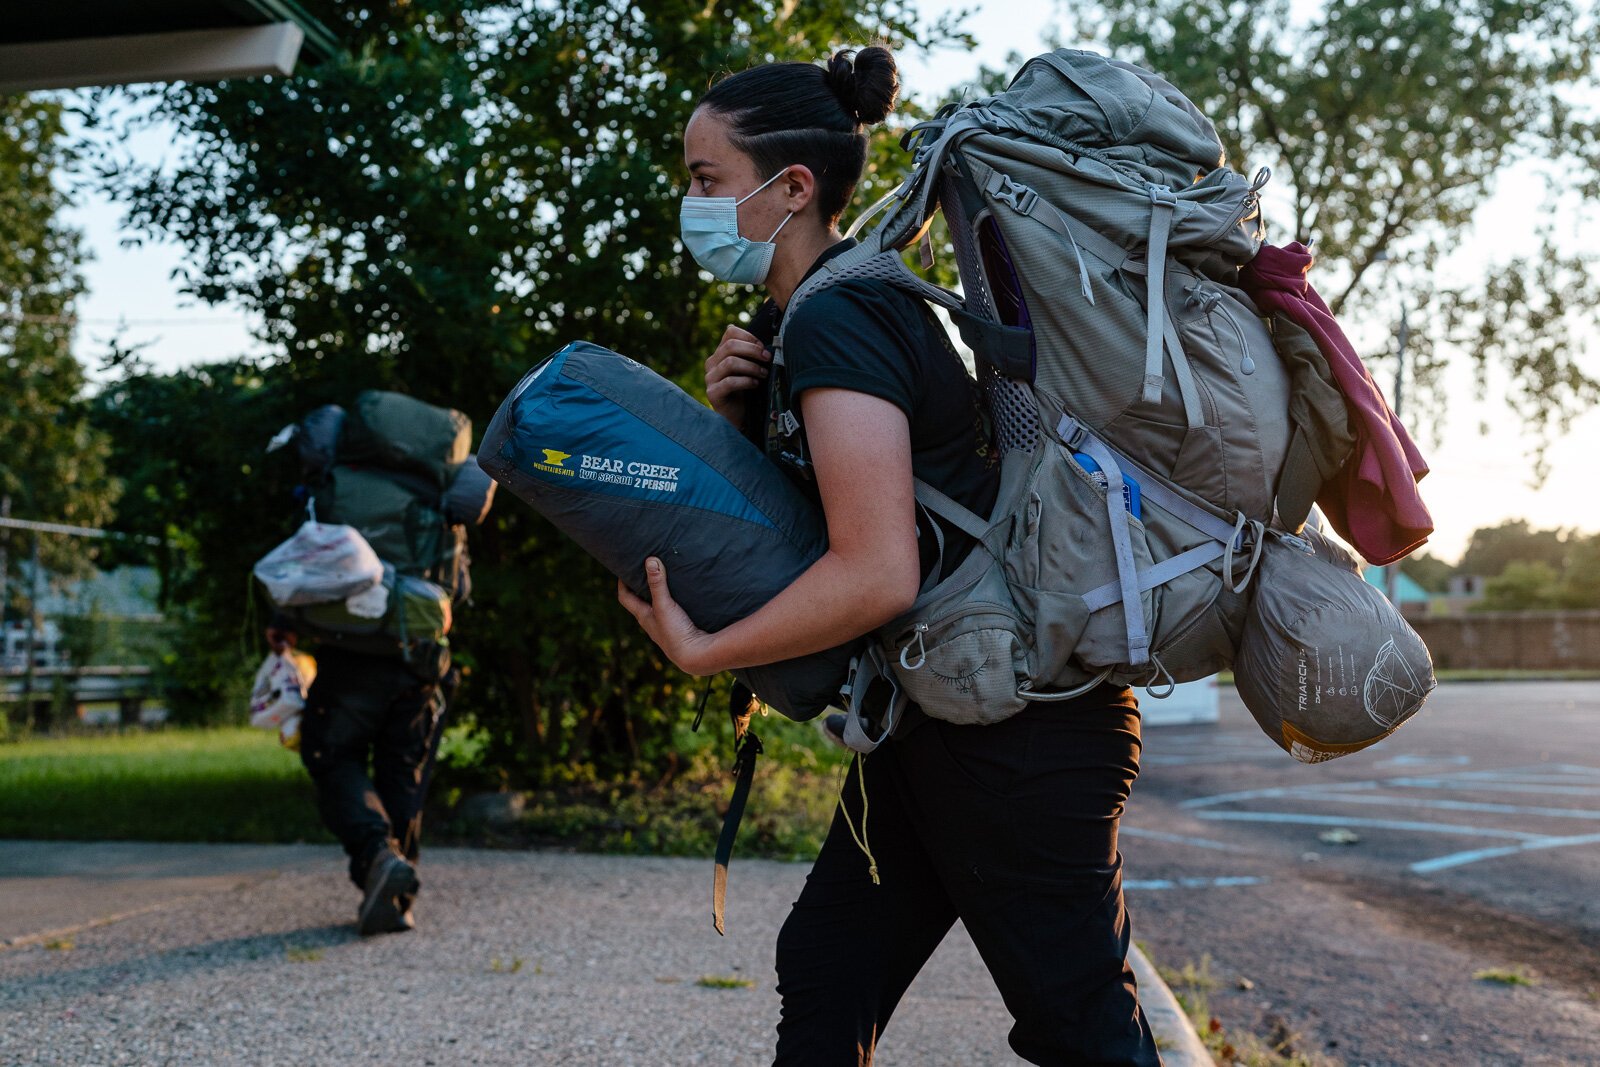 Counselor Natalie Ramos unpacks gear from a Detroit Outdoors camping trip to Pictured Rocks.